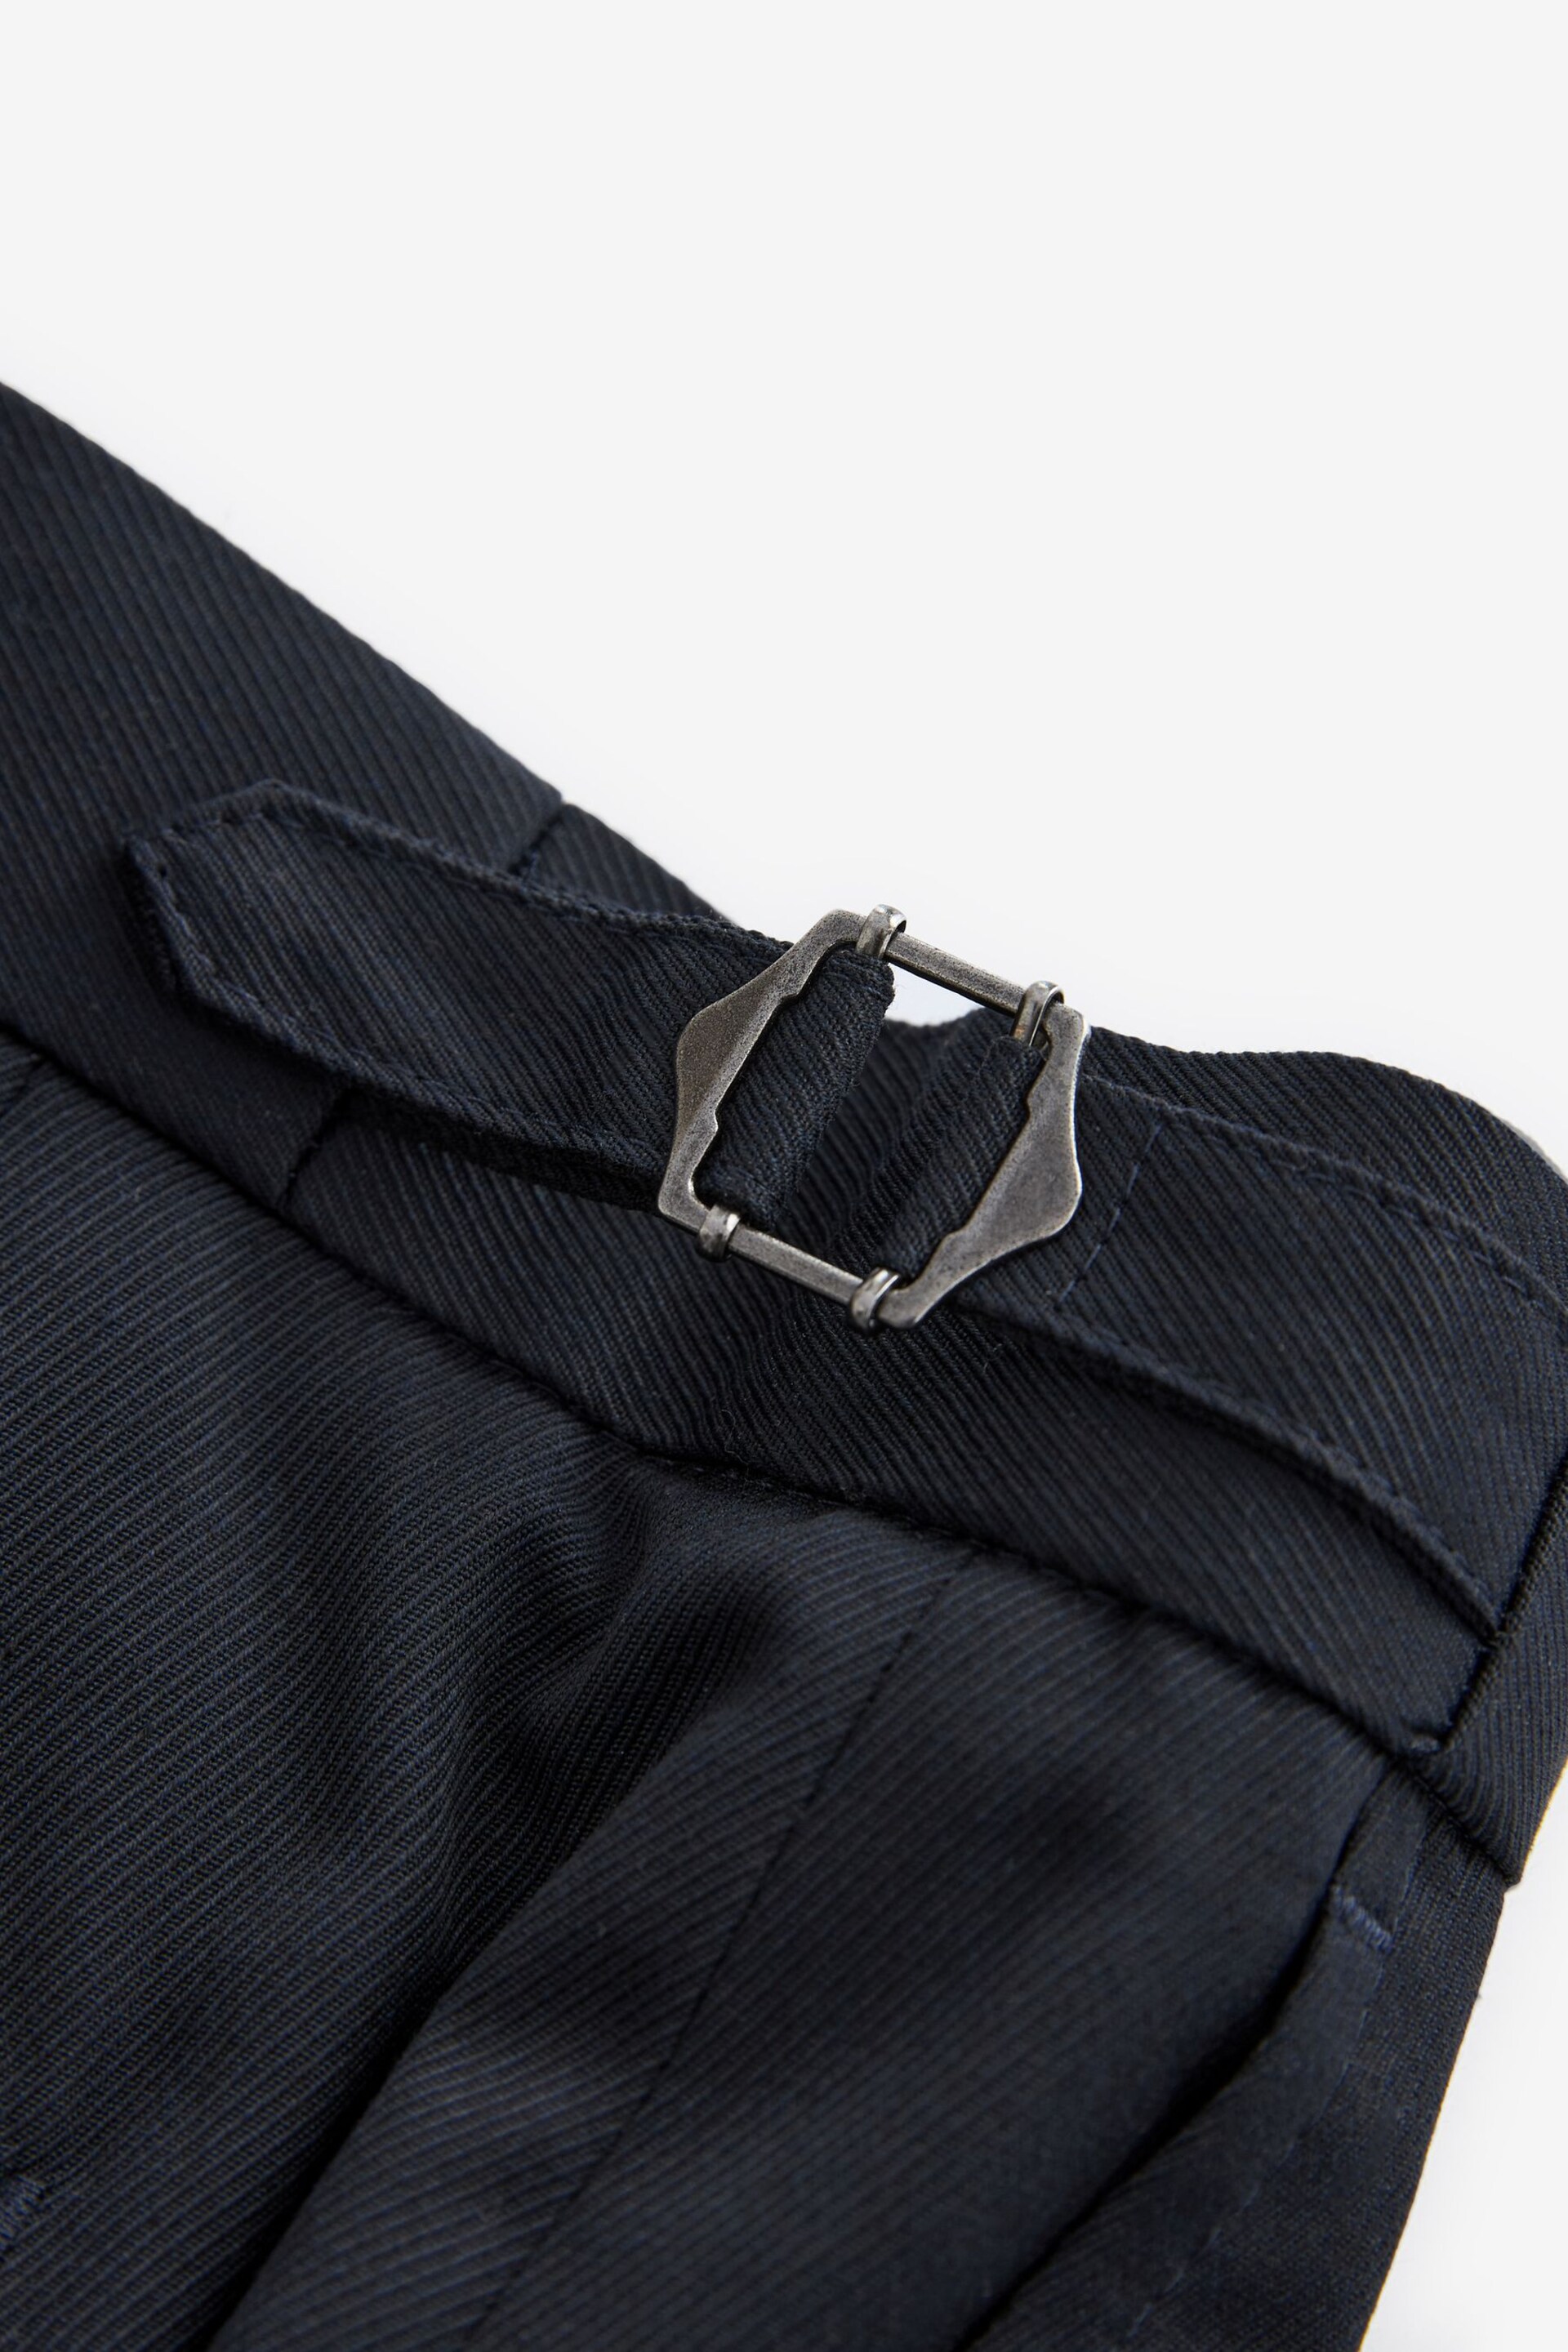 Navy Blue Slim Fit Smart Twill Side Adjuster Trousers - Image 7 of 9